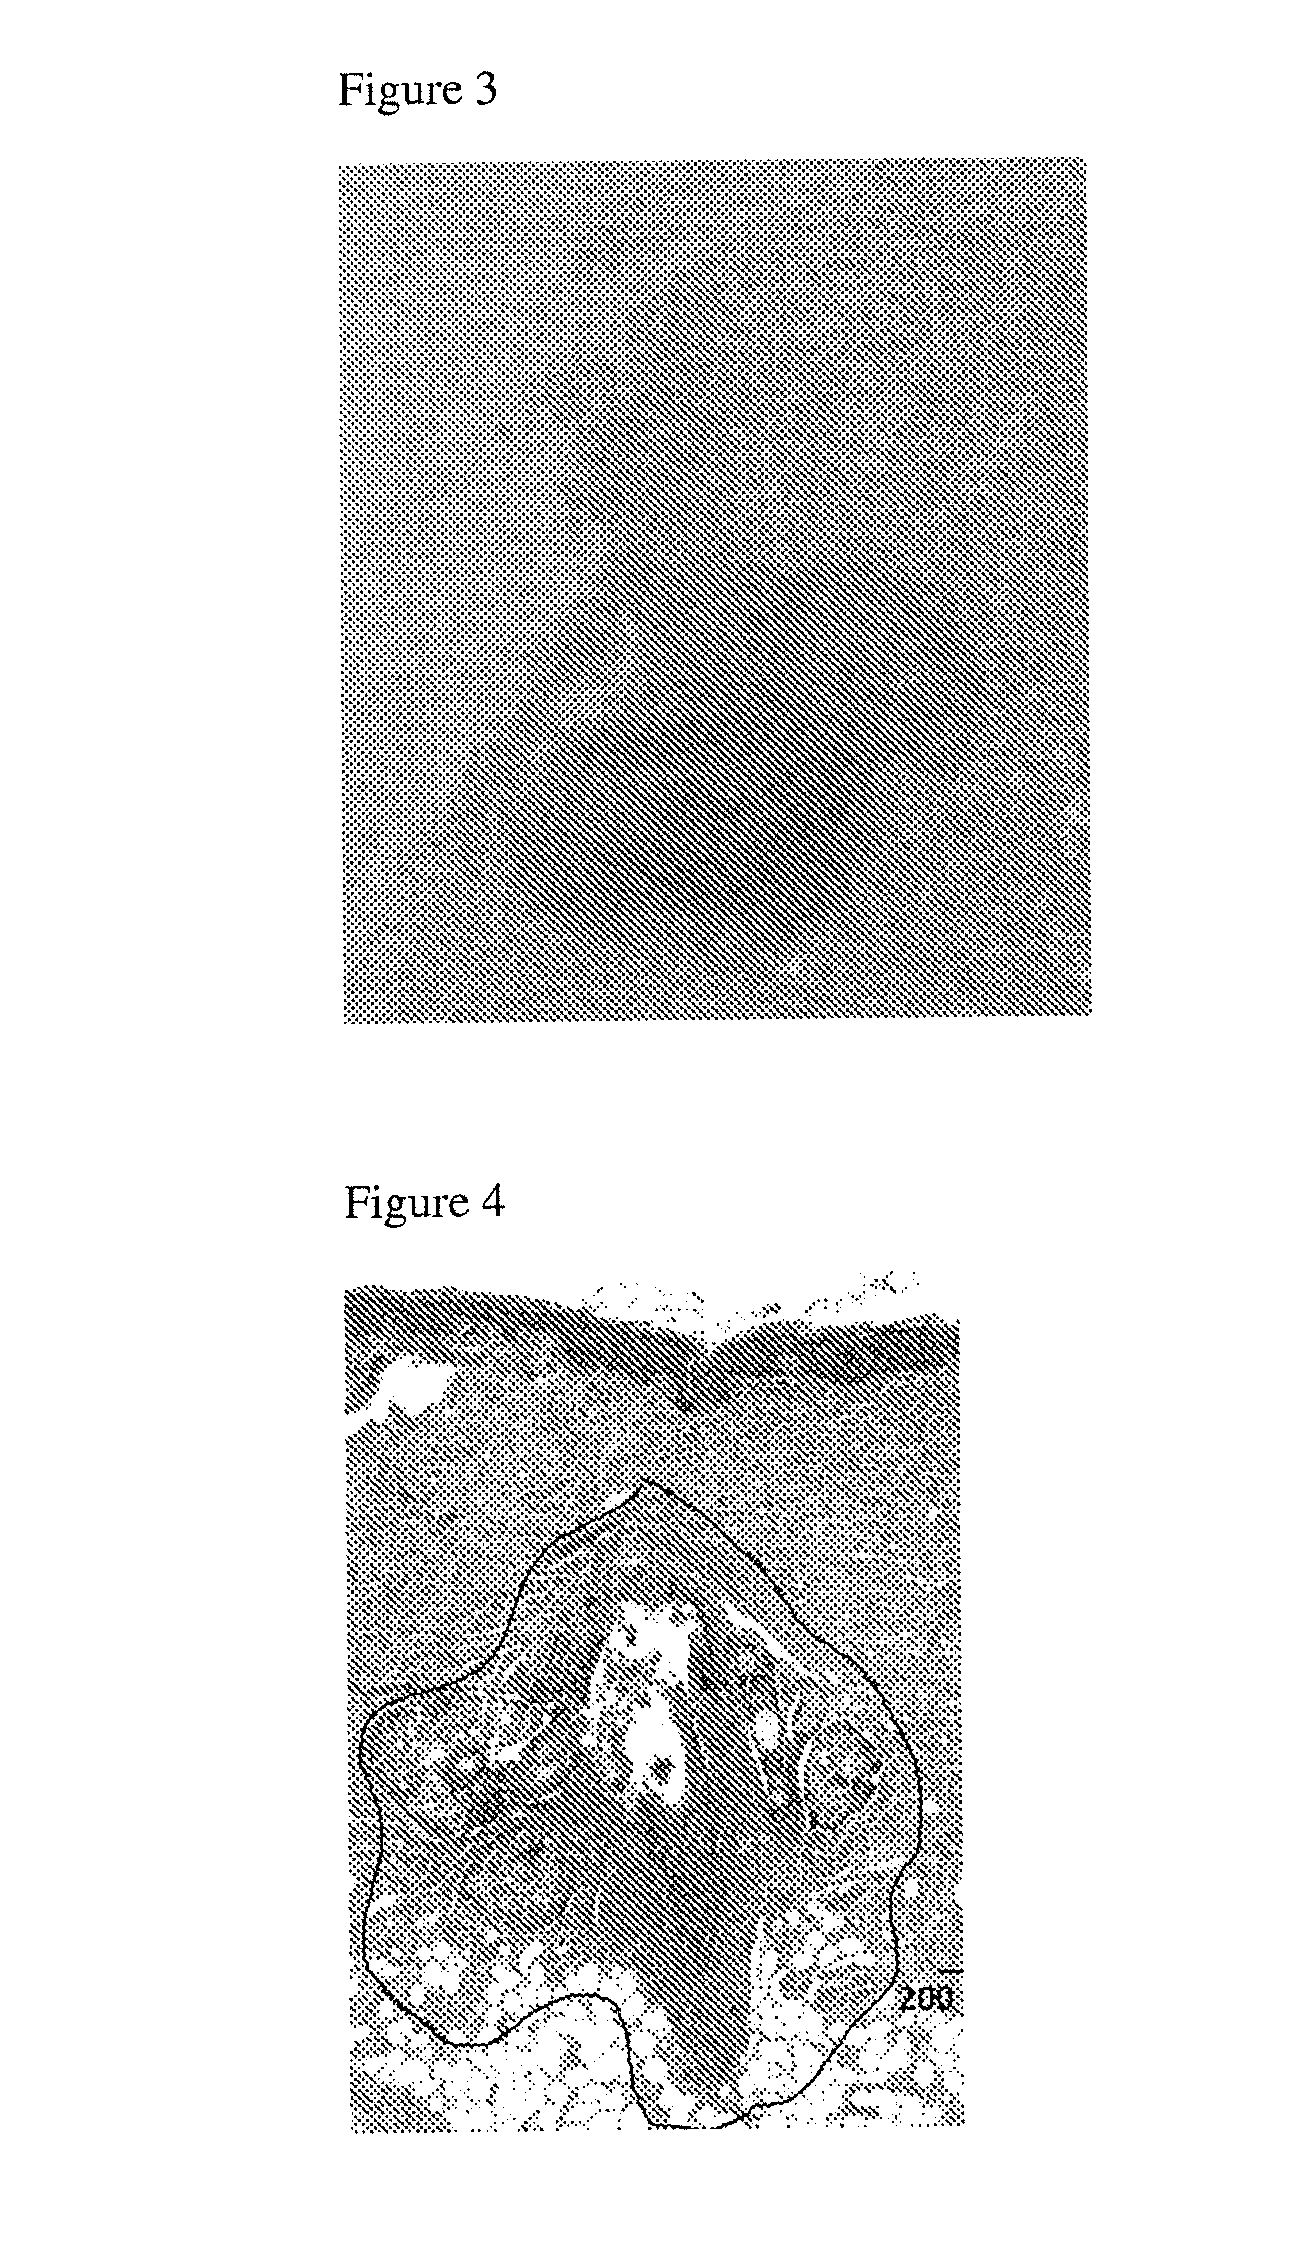 Treatment intervals for use of compositions comprising energy absorbing materials for dermatological applications